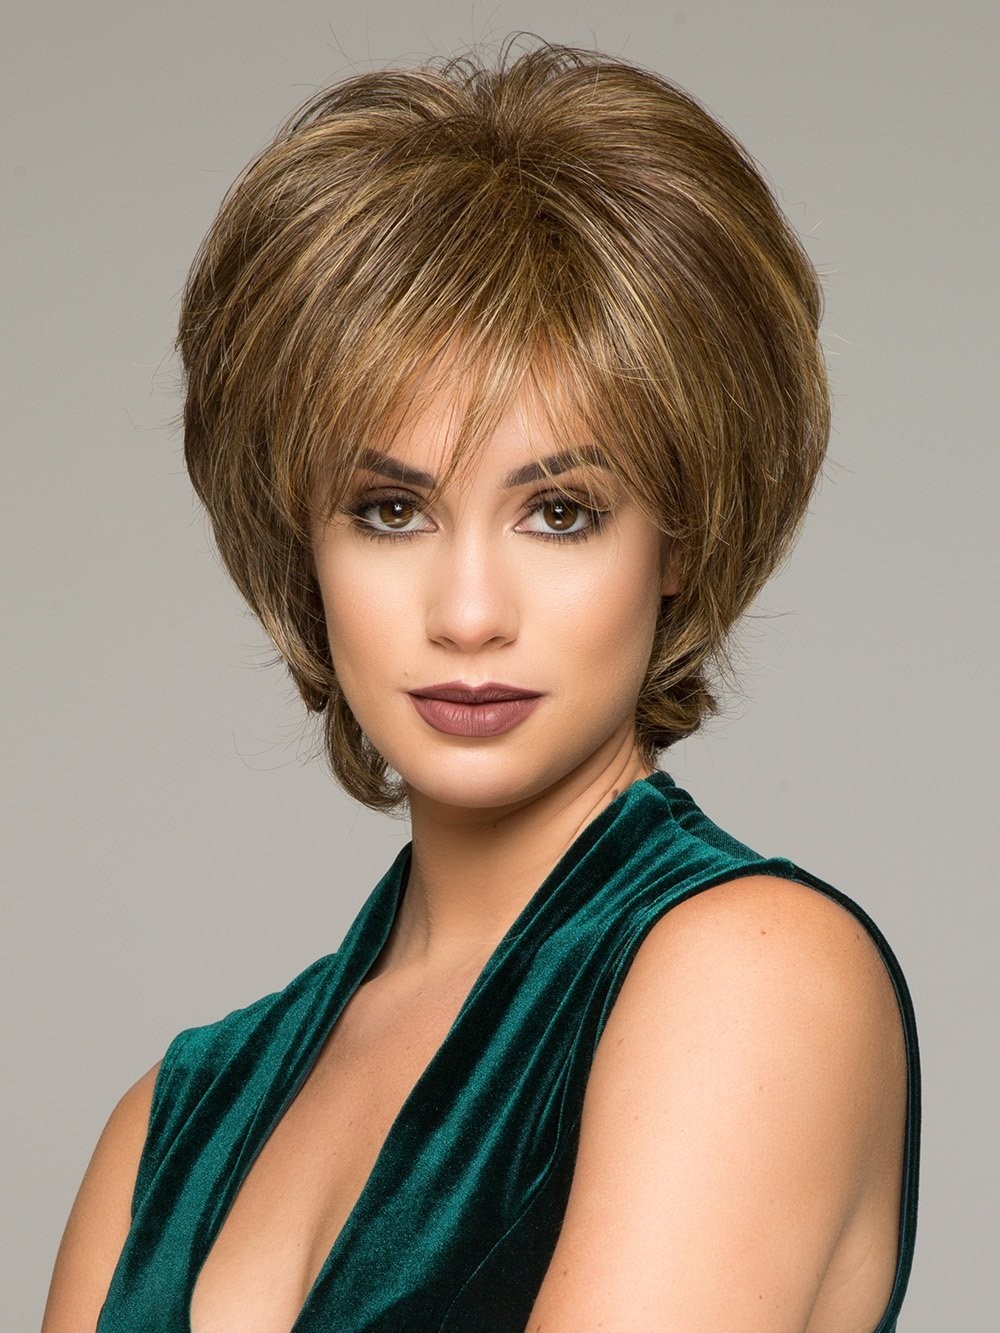 Fashion Layered Cut Short Women Synthetic Wig With Side Bang, Chin Length Wigs, Capless Wigs